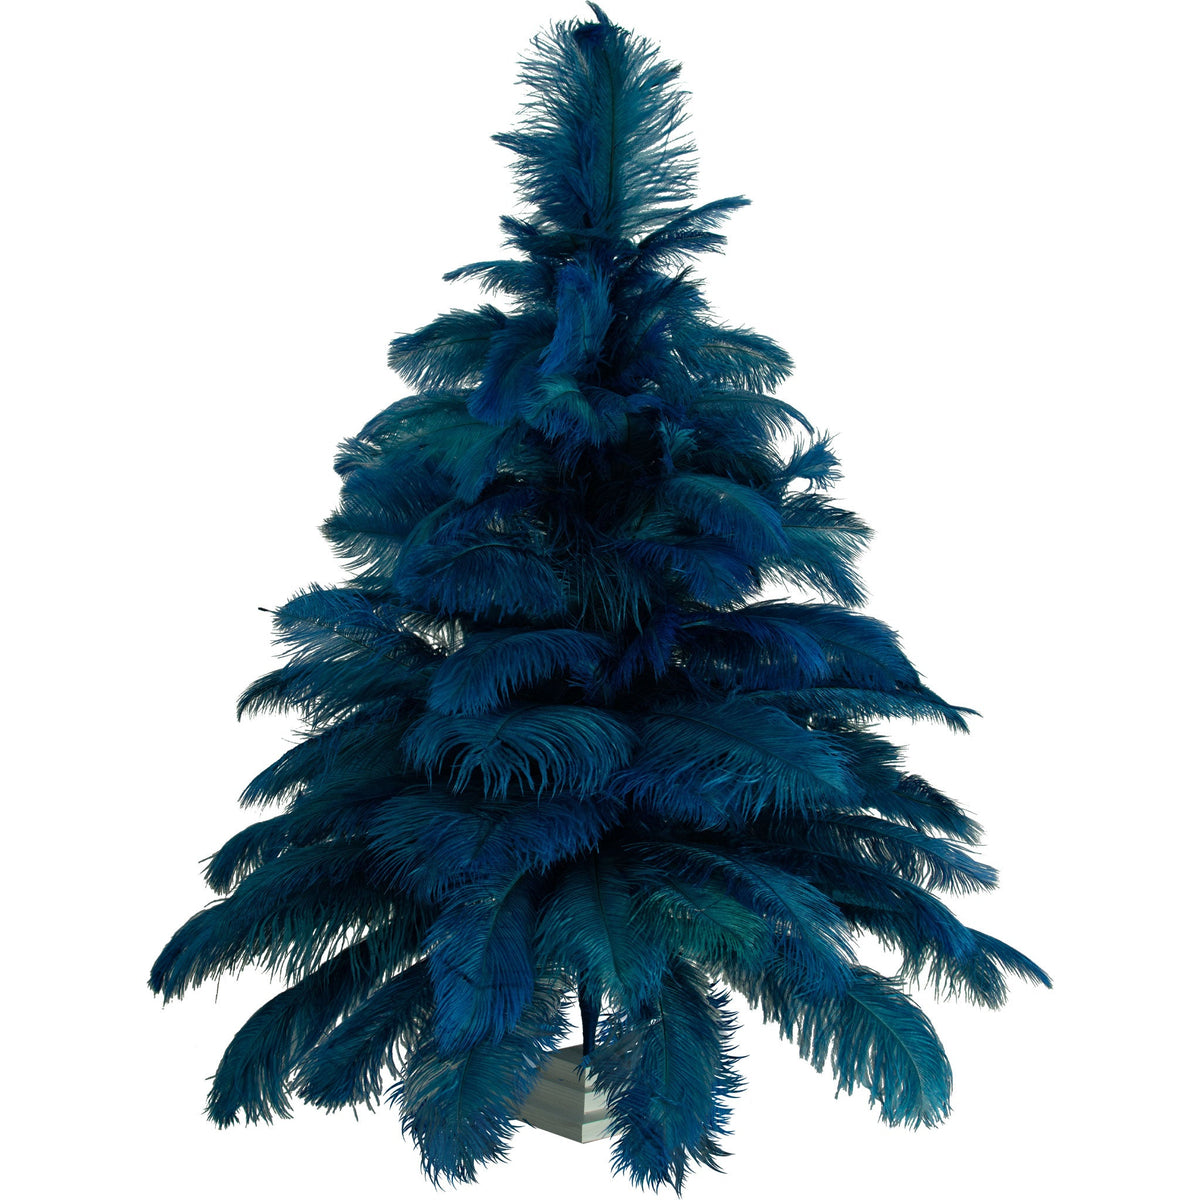 Introducing Lee Display's brand new Blue Ostrich Feather Christmas Trees! Made with real ostrich feathers